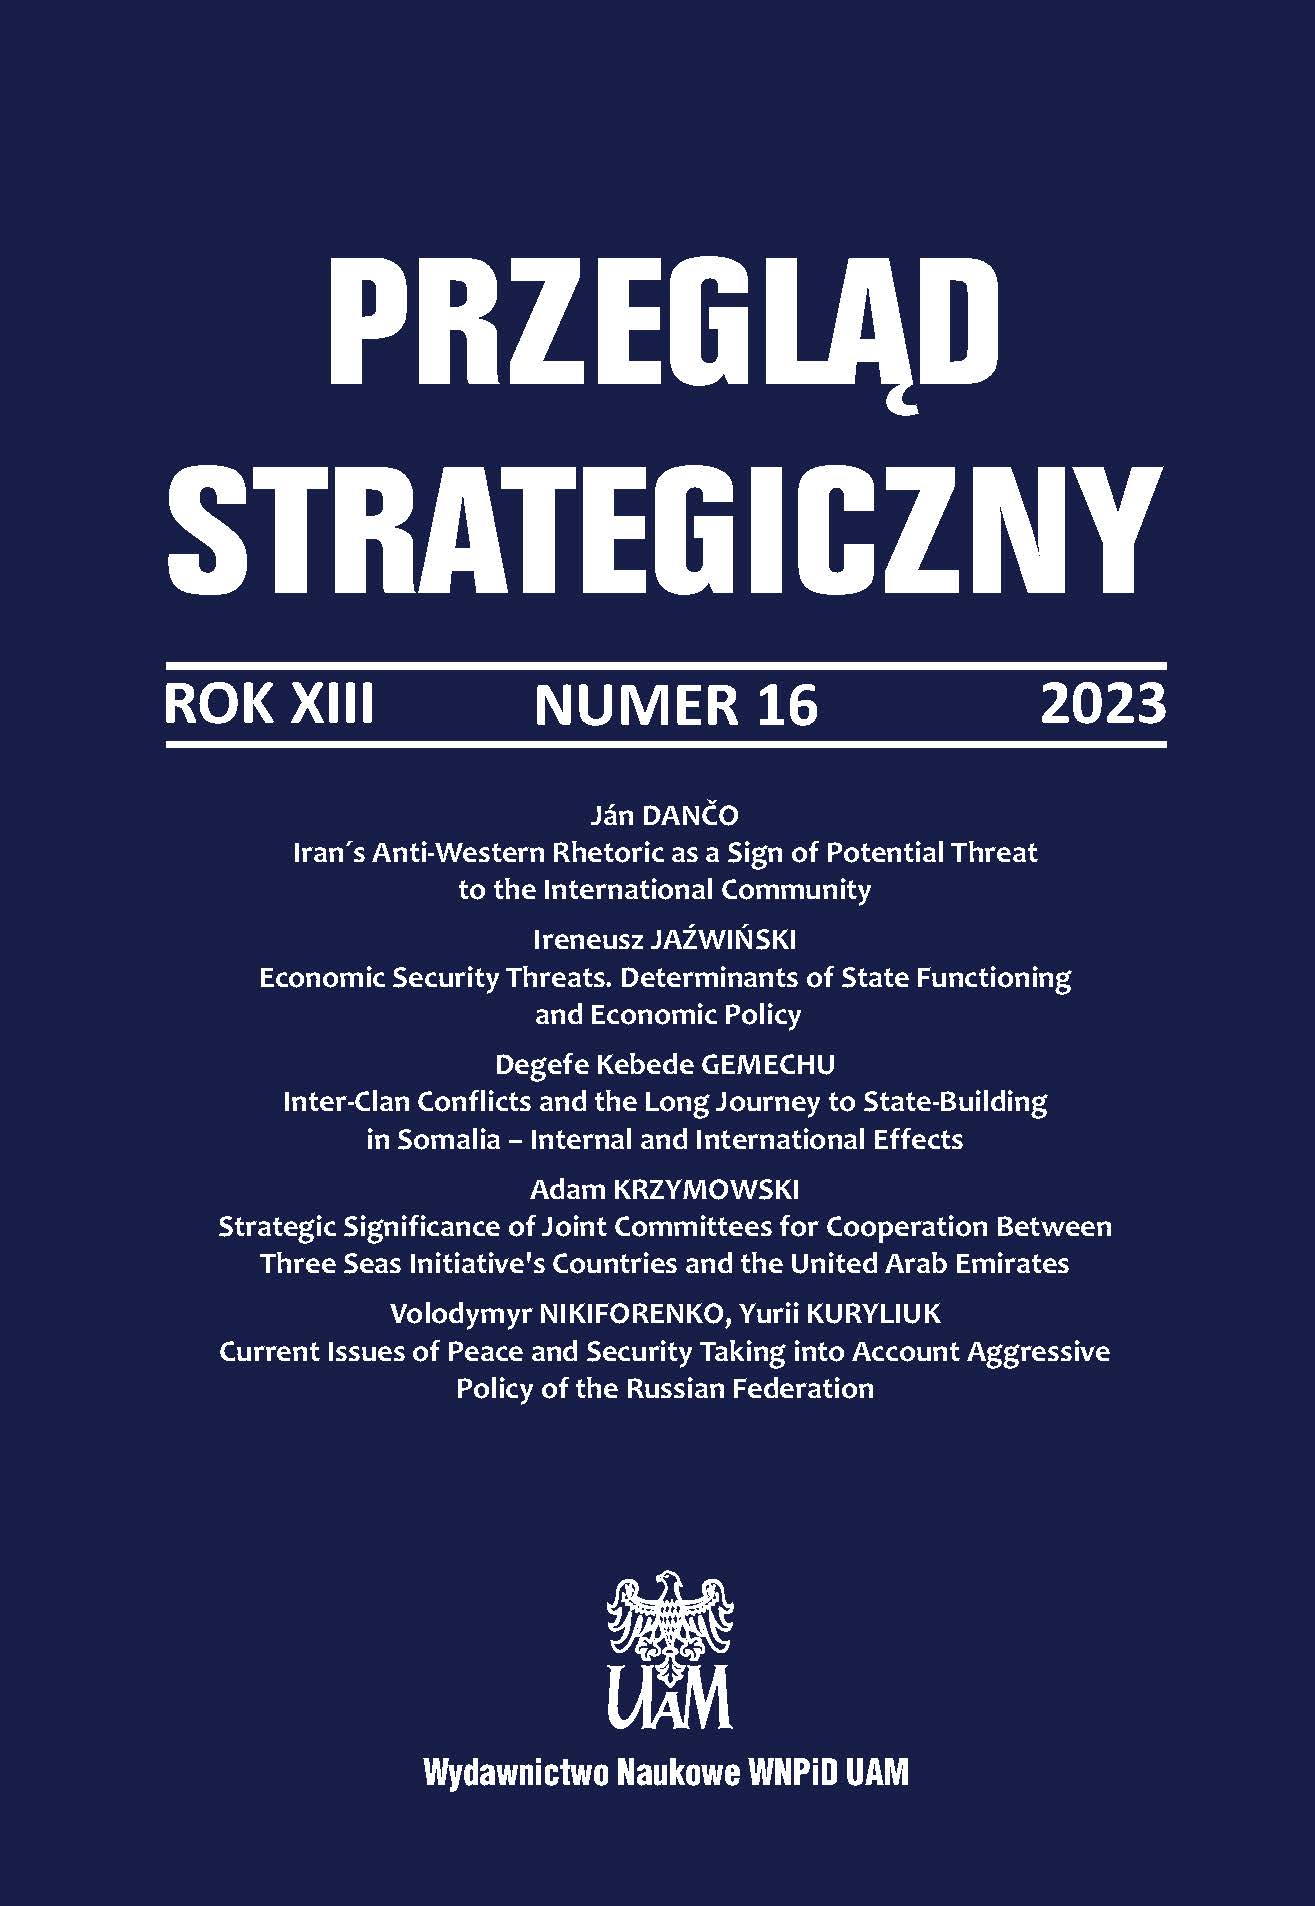 The Role of Small States in Promoting International Security: Lithuania Strategy Cover Image